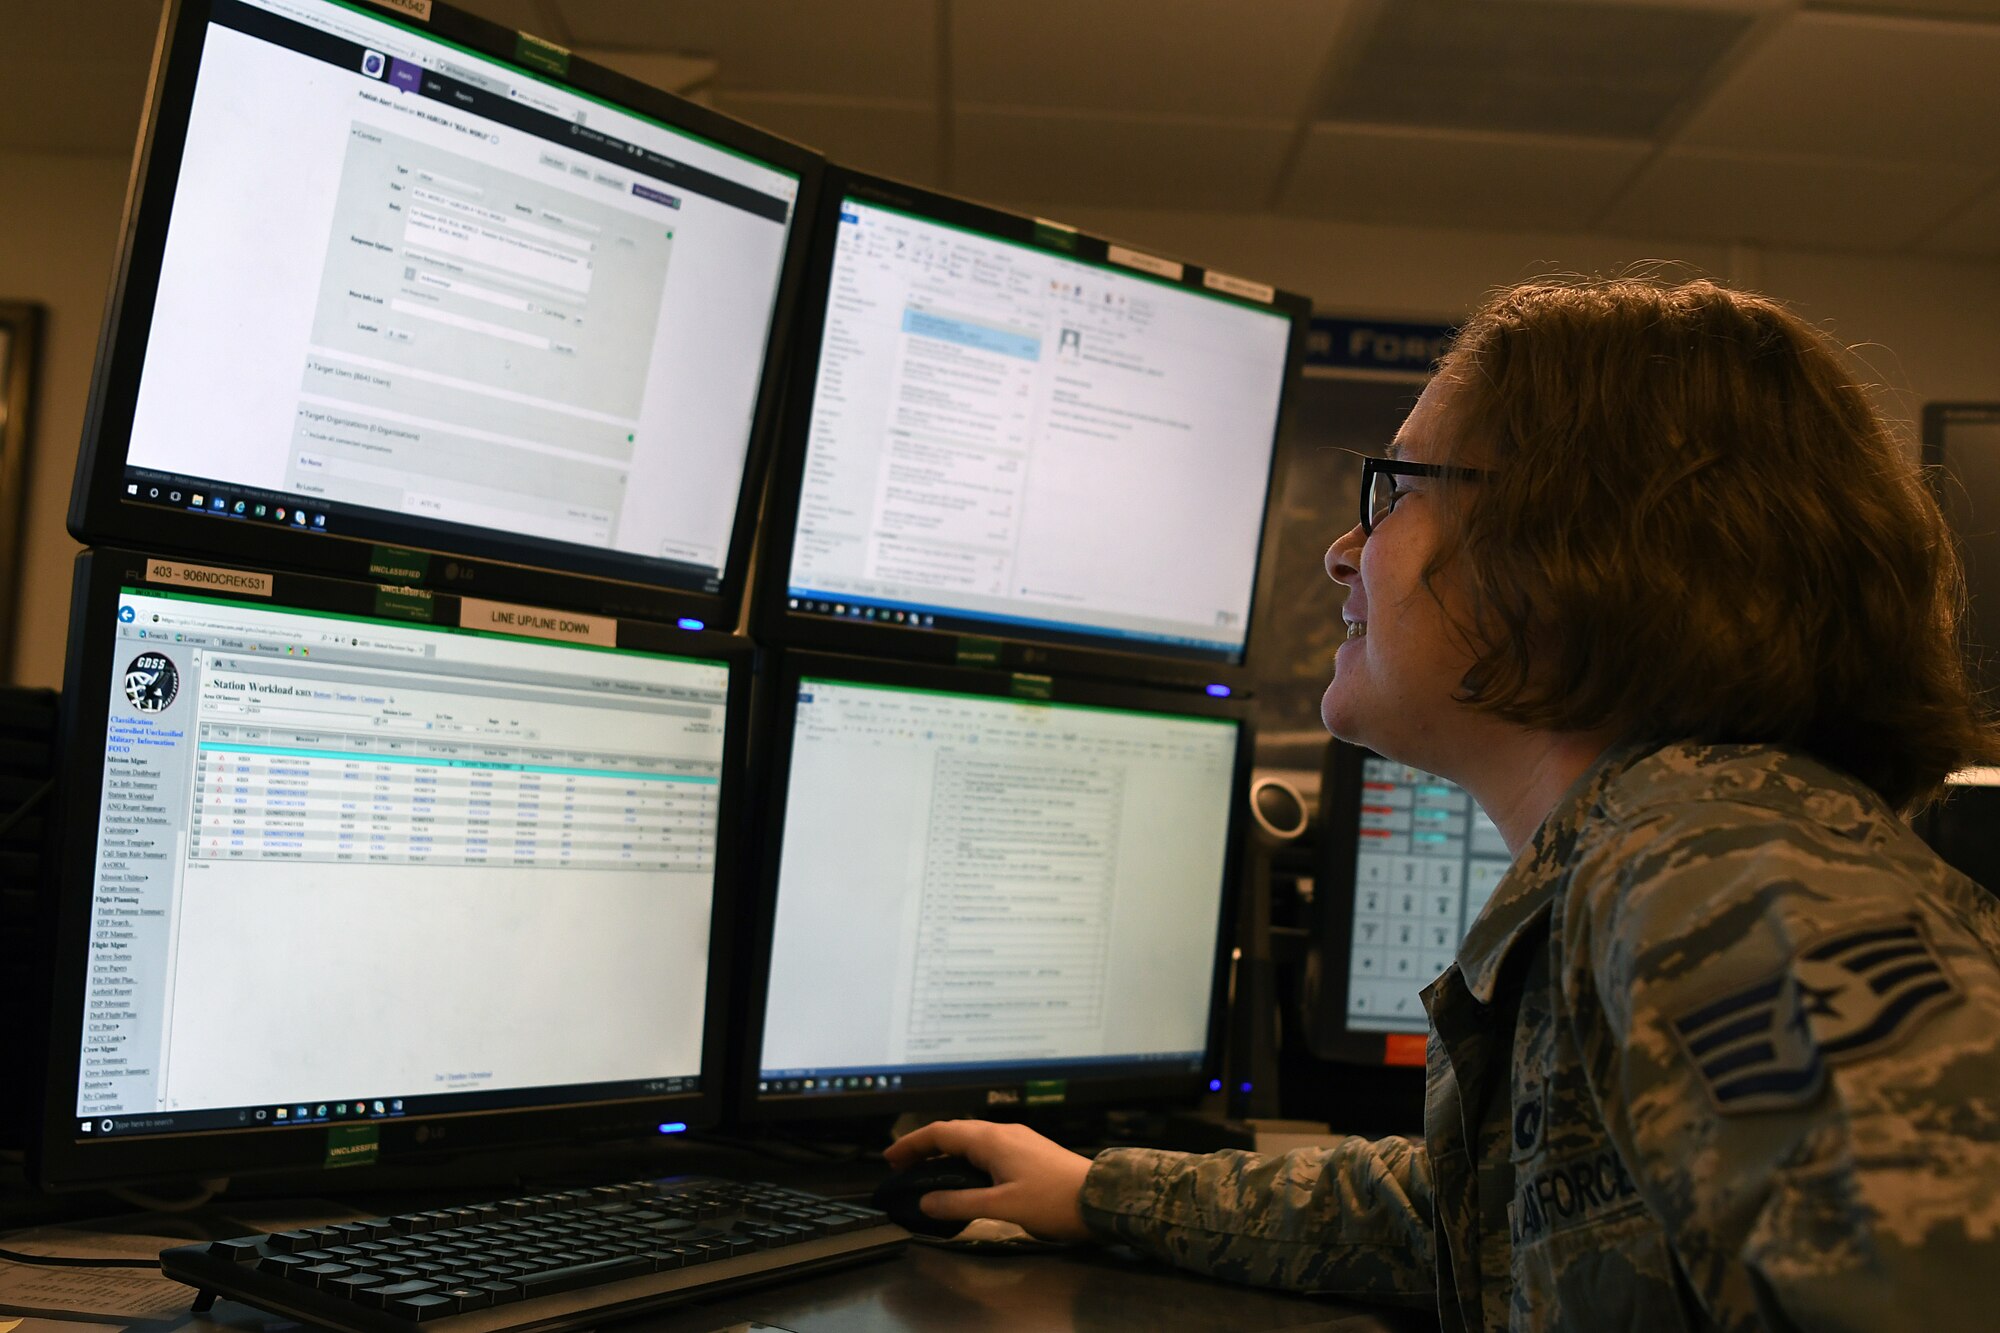 U.S. Air Force Staff Sgt. Kaylee Sprout, 81st Training Wing emergency action controller NCO in charge of systems, looks over emergency notification systems in the command post at Keesler Air Force Base, Mississippi, June 5, 2018. Emergency action controllers are responsible for receiving and disseminating information during emergencies. (U.S. Air Force photo by Airman 1st Class Suzie Plotnikov)